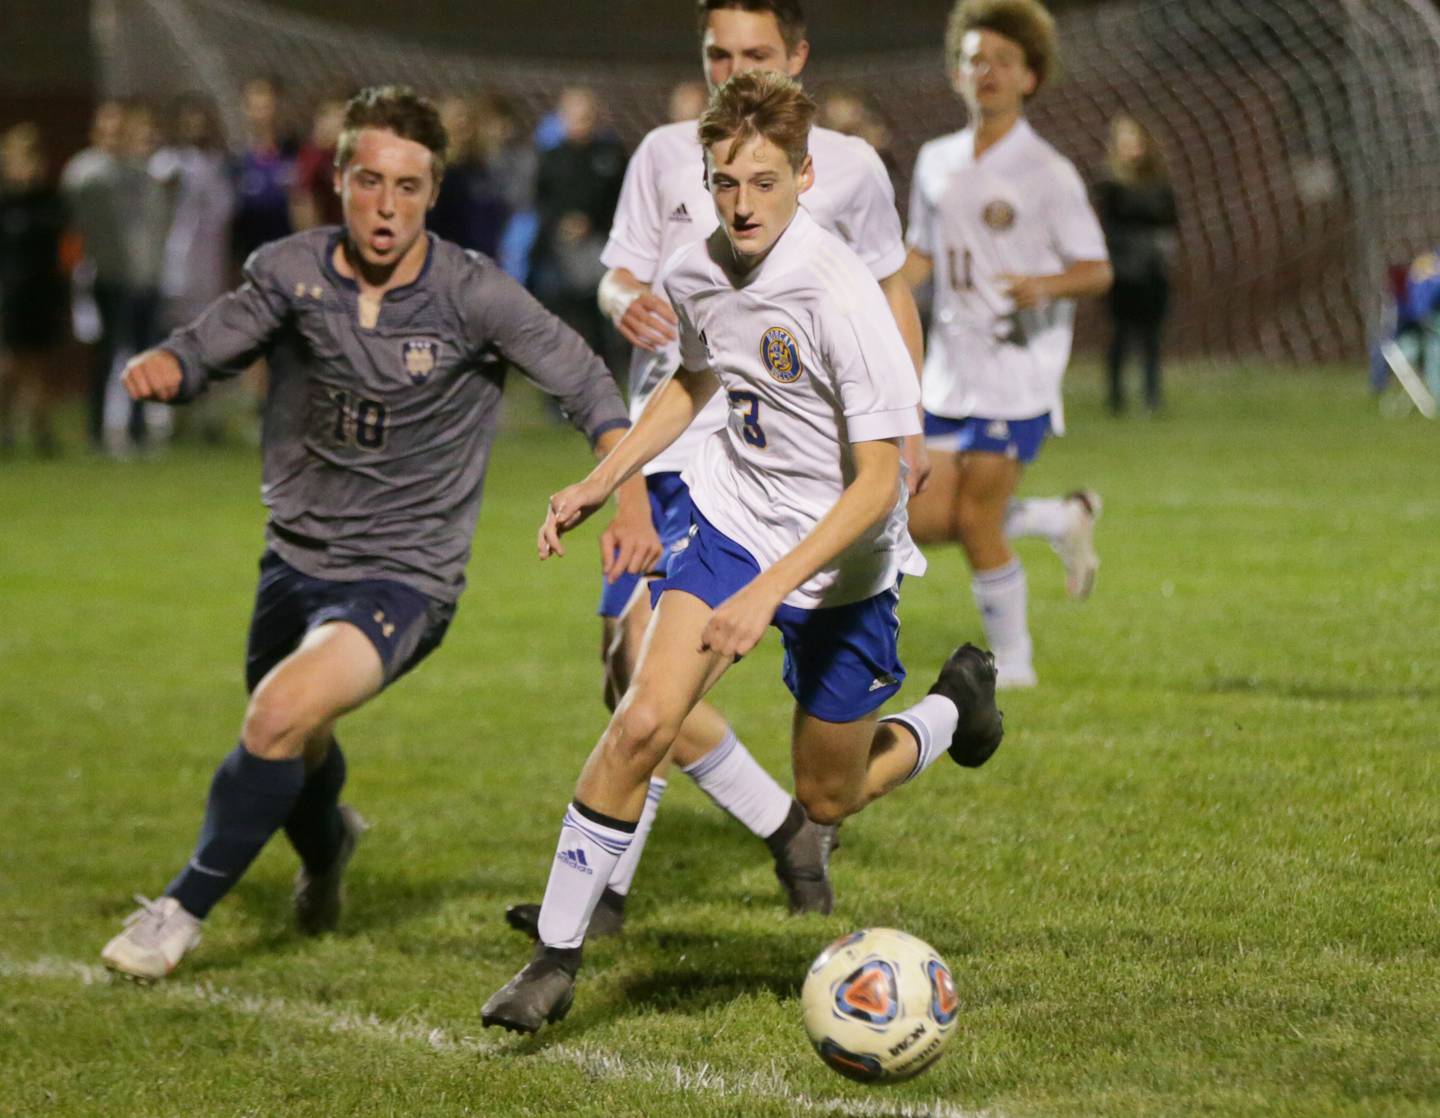 Somonauk's Chase Lafferty (3) kicks the ball downfield as Quincy Notre Dame's Jake Hoyt (10) defends in the Class 1A Sectional semifinal game in Chillicothe on Tuesday Oct. 19, 2021.